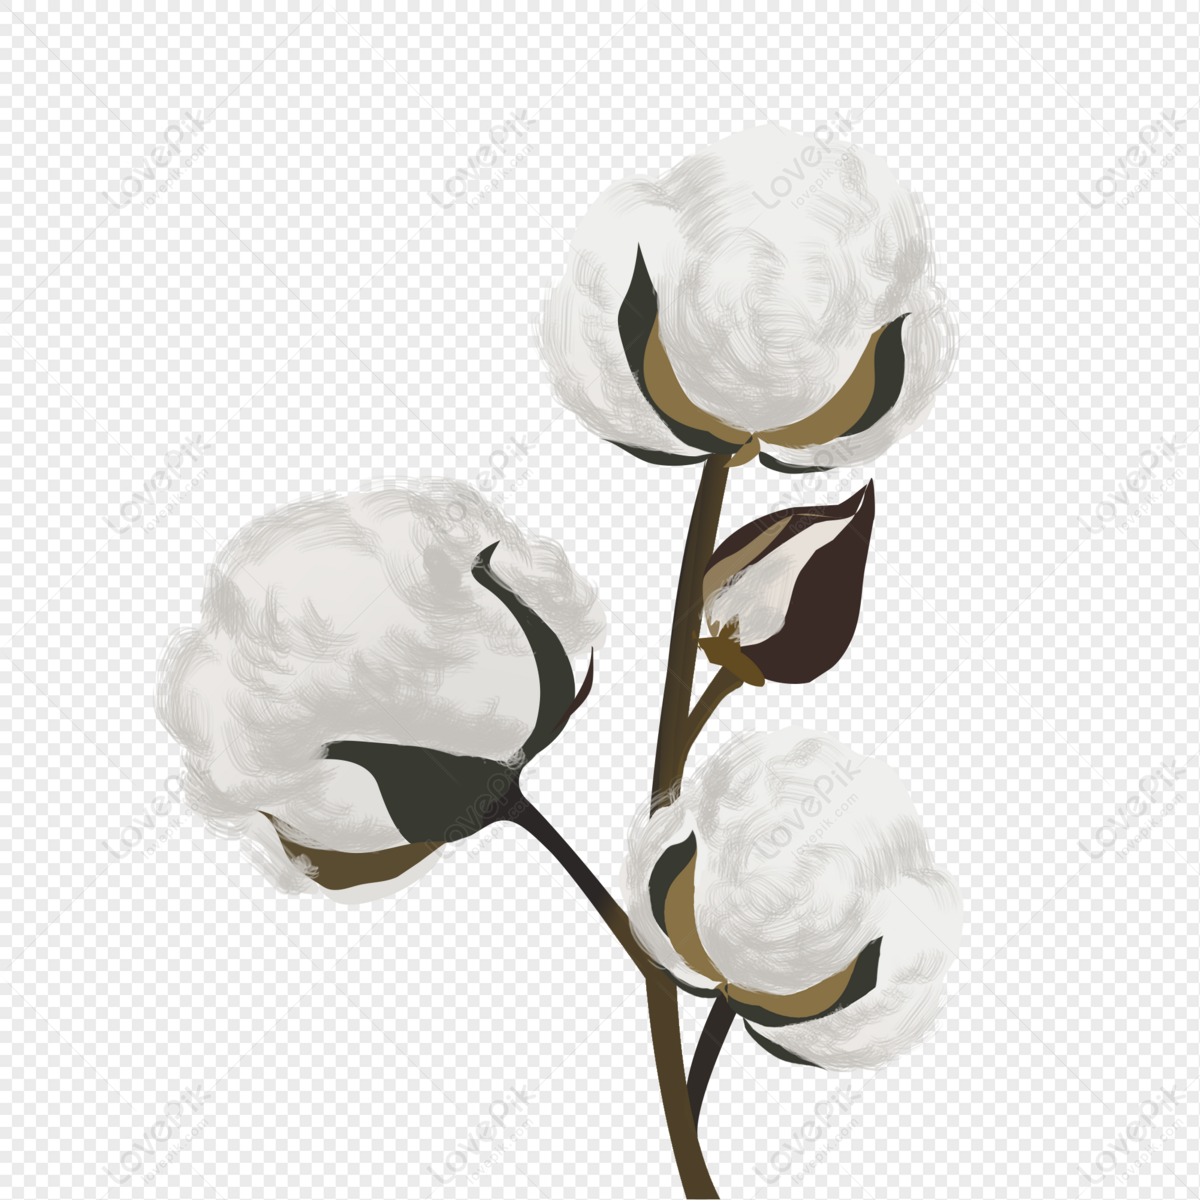 Cotton PNG Image And Clipart Image For Free Download - Lovepik | 401531208